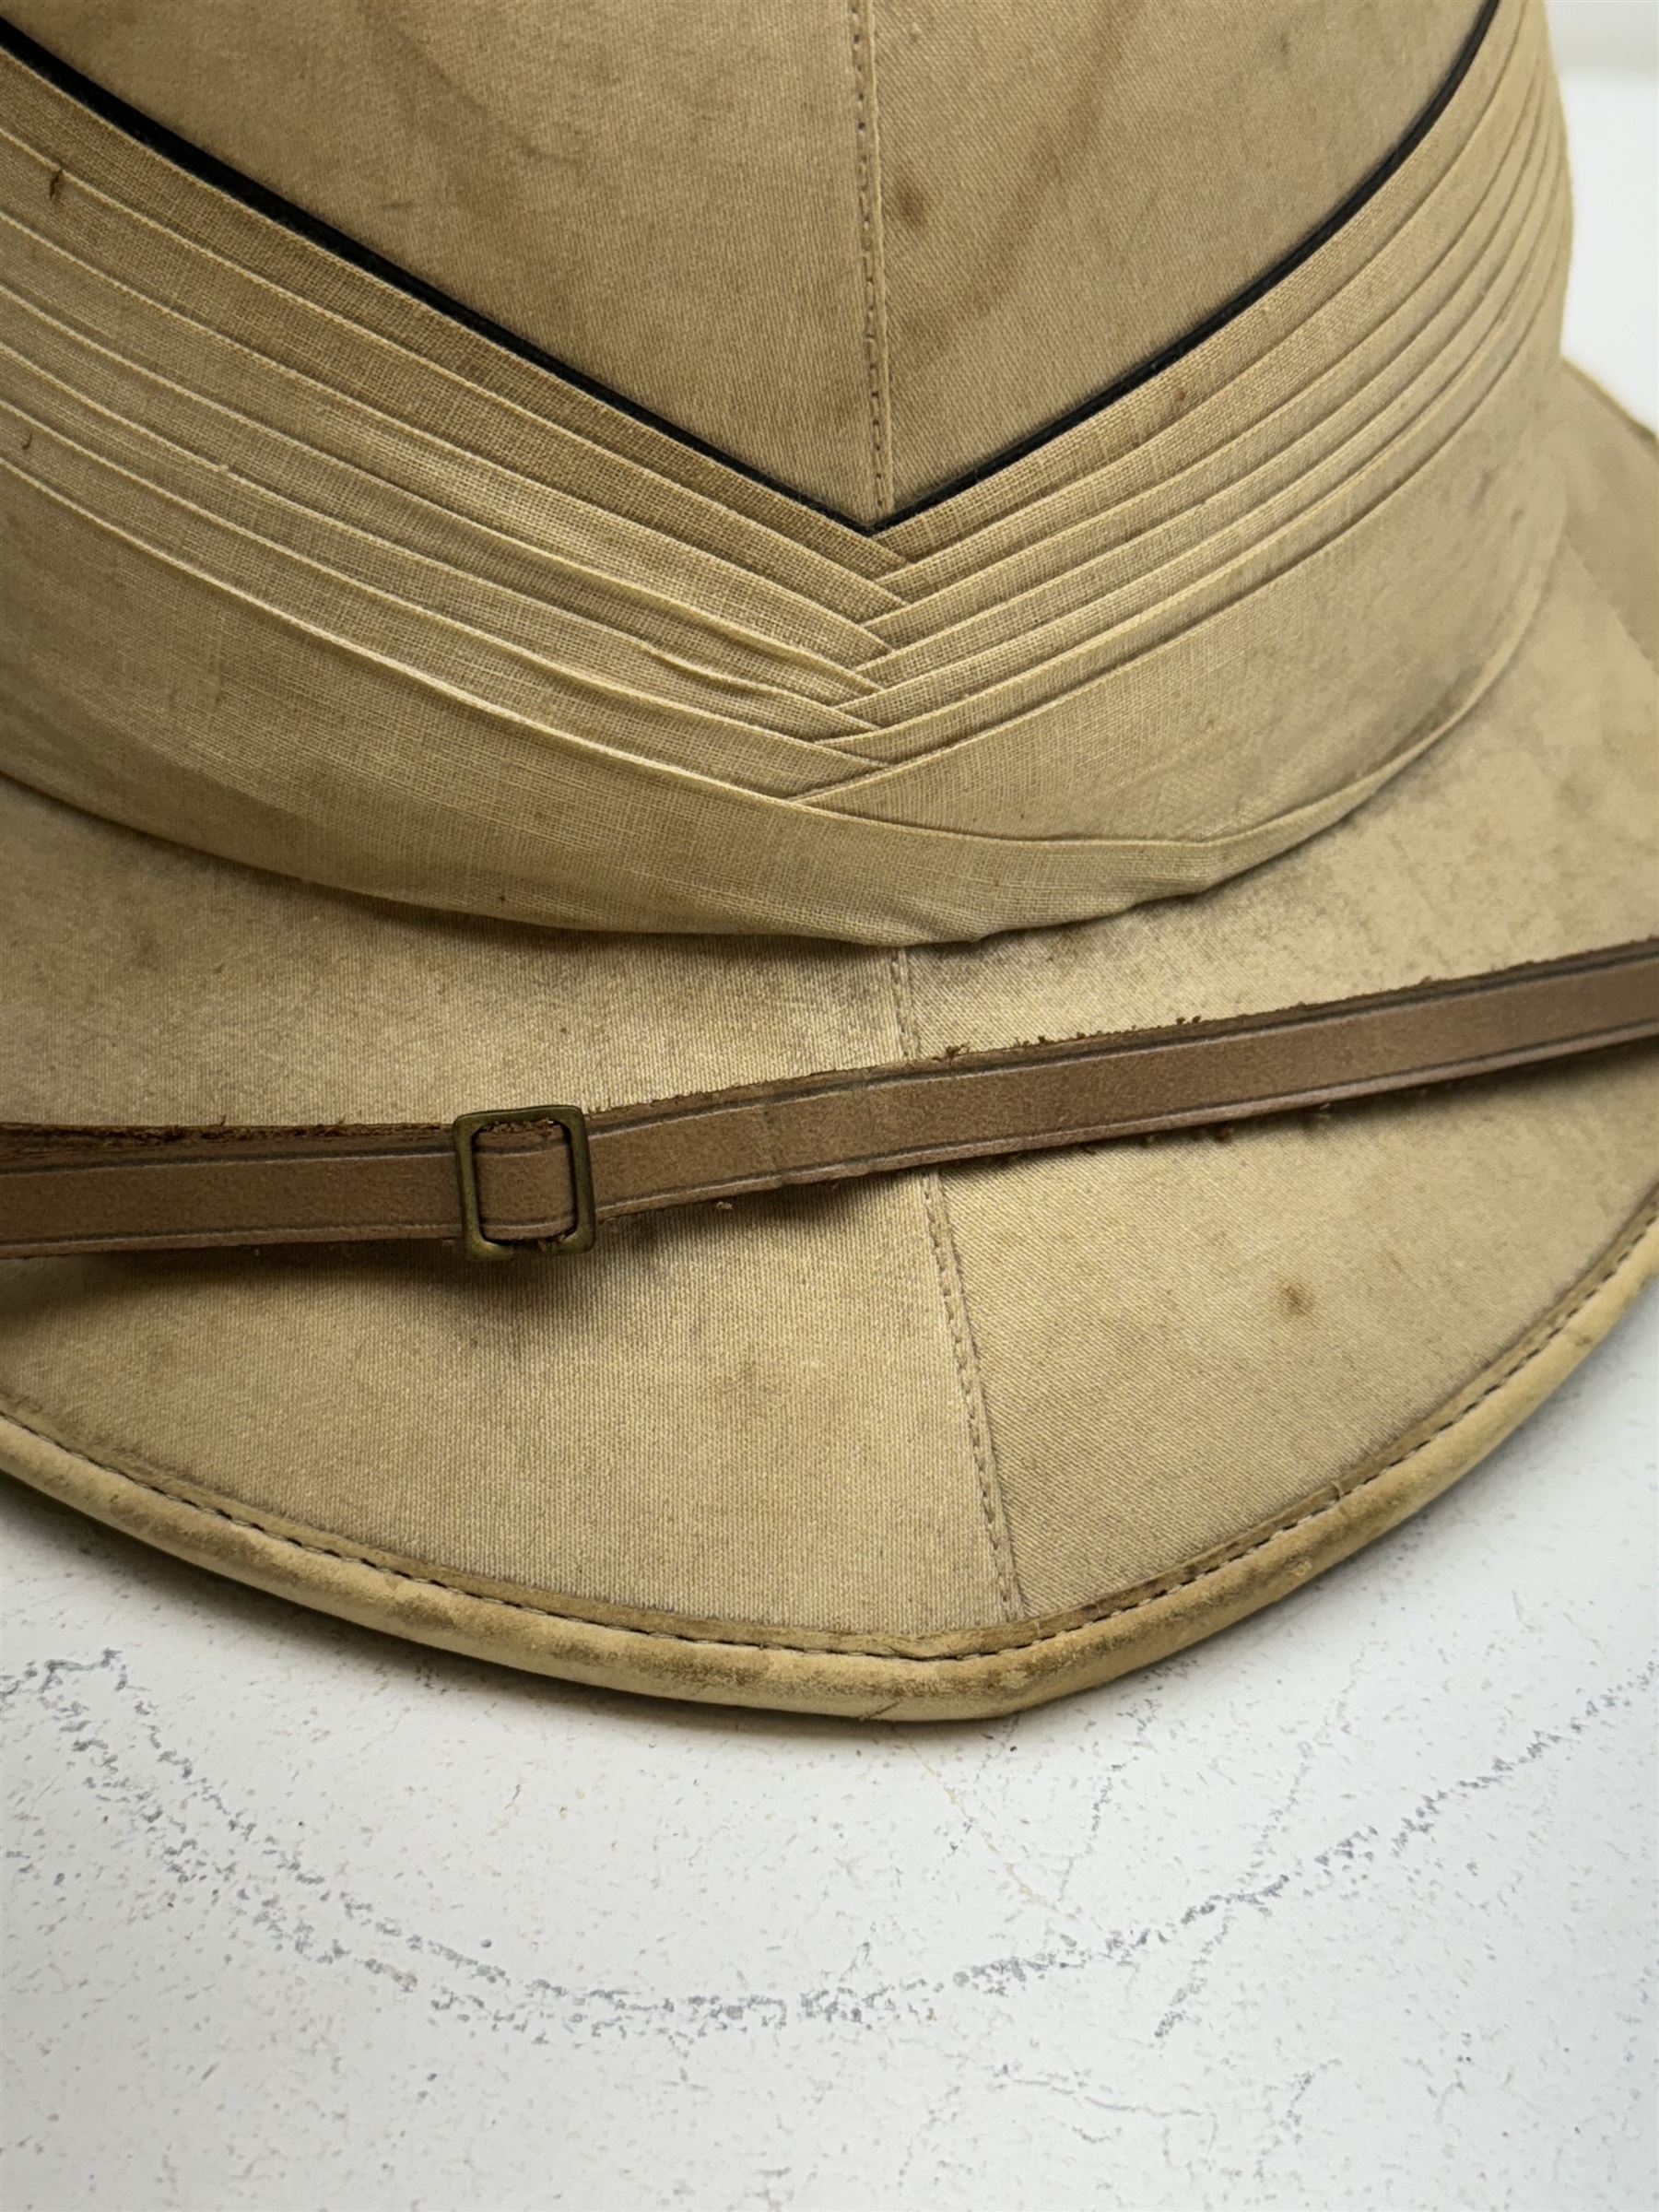 WWII Royal Navy officers sun helmet with large folded pagri and black top line - Image 4 of 5